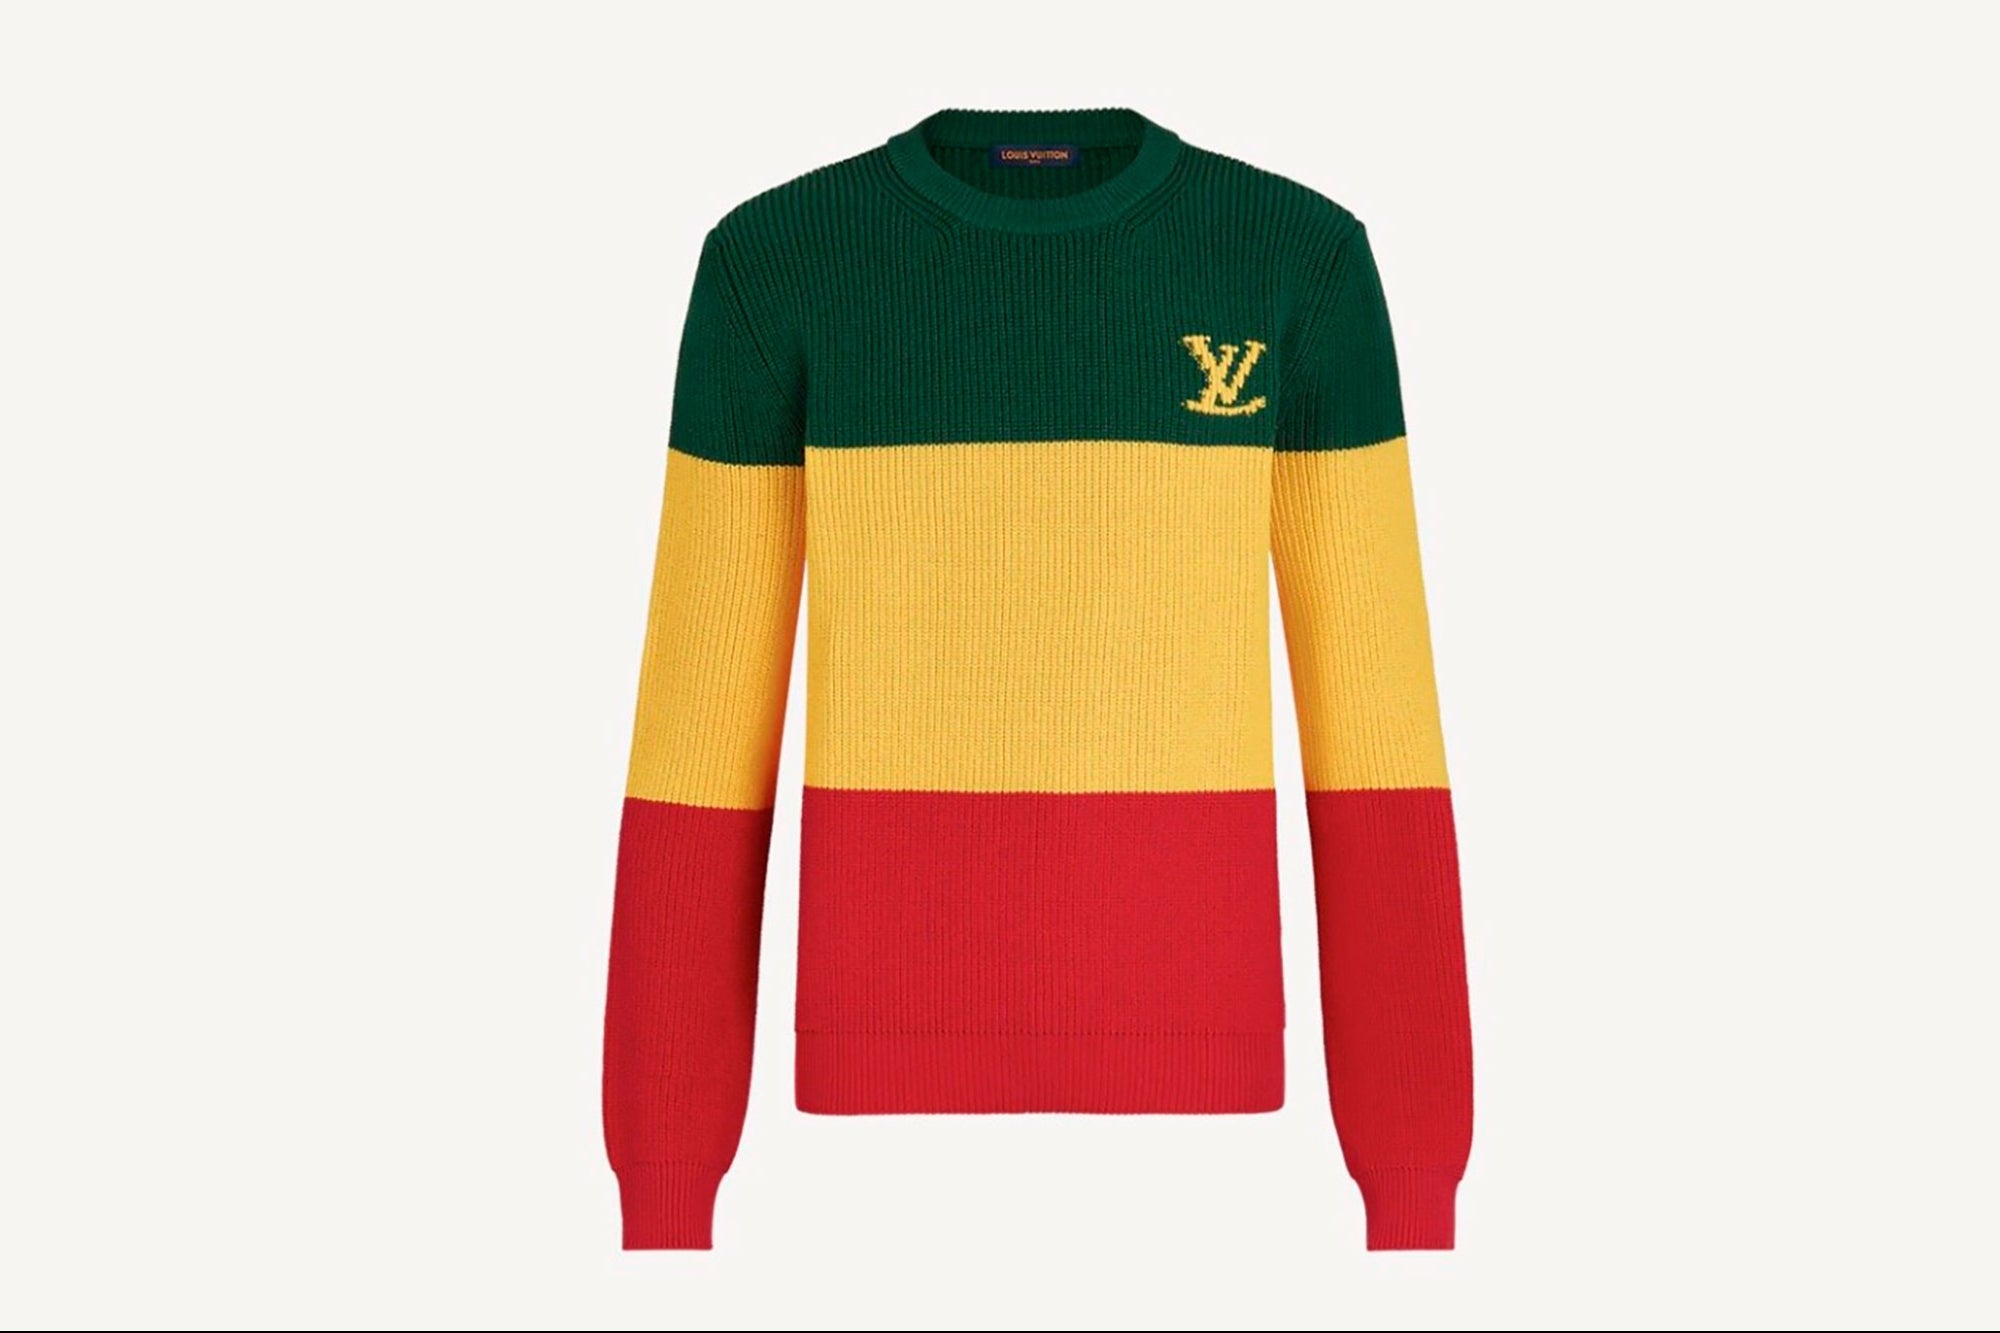 Louis Vuitton pays homage to the Jamaican flag, but gets the